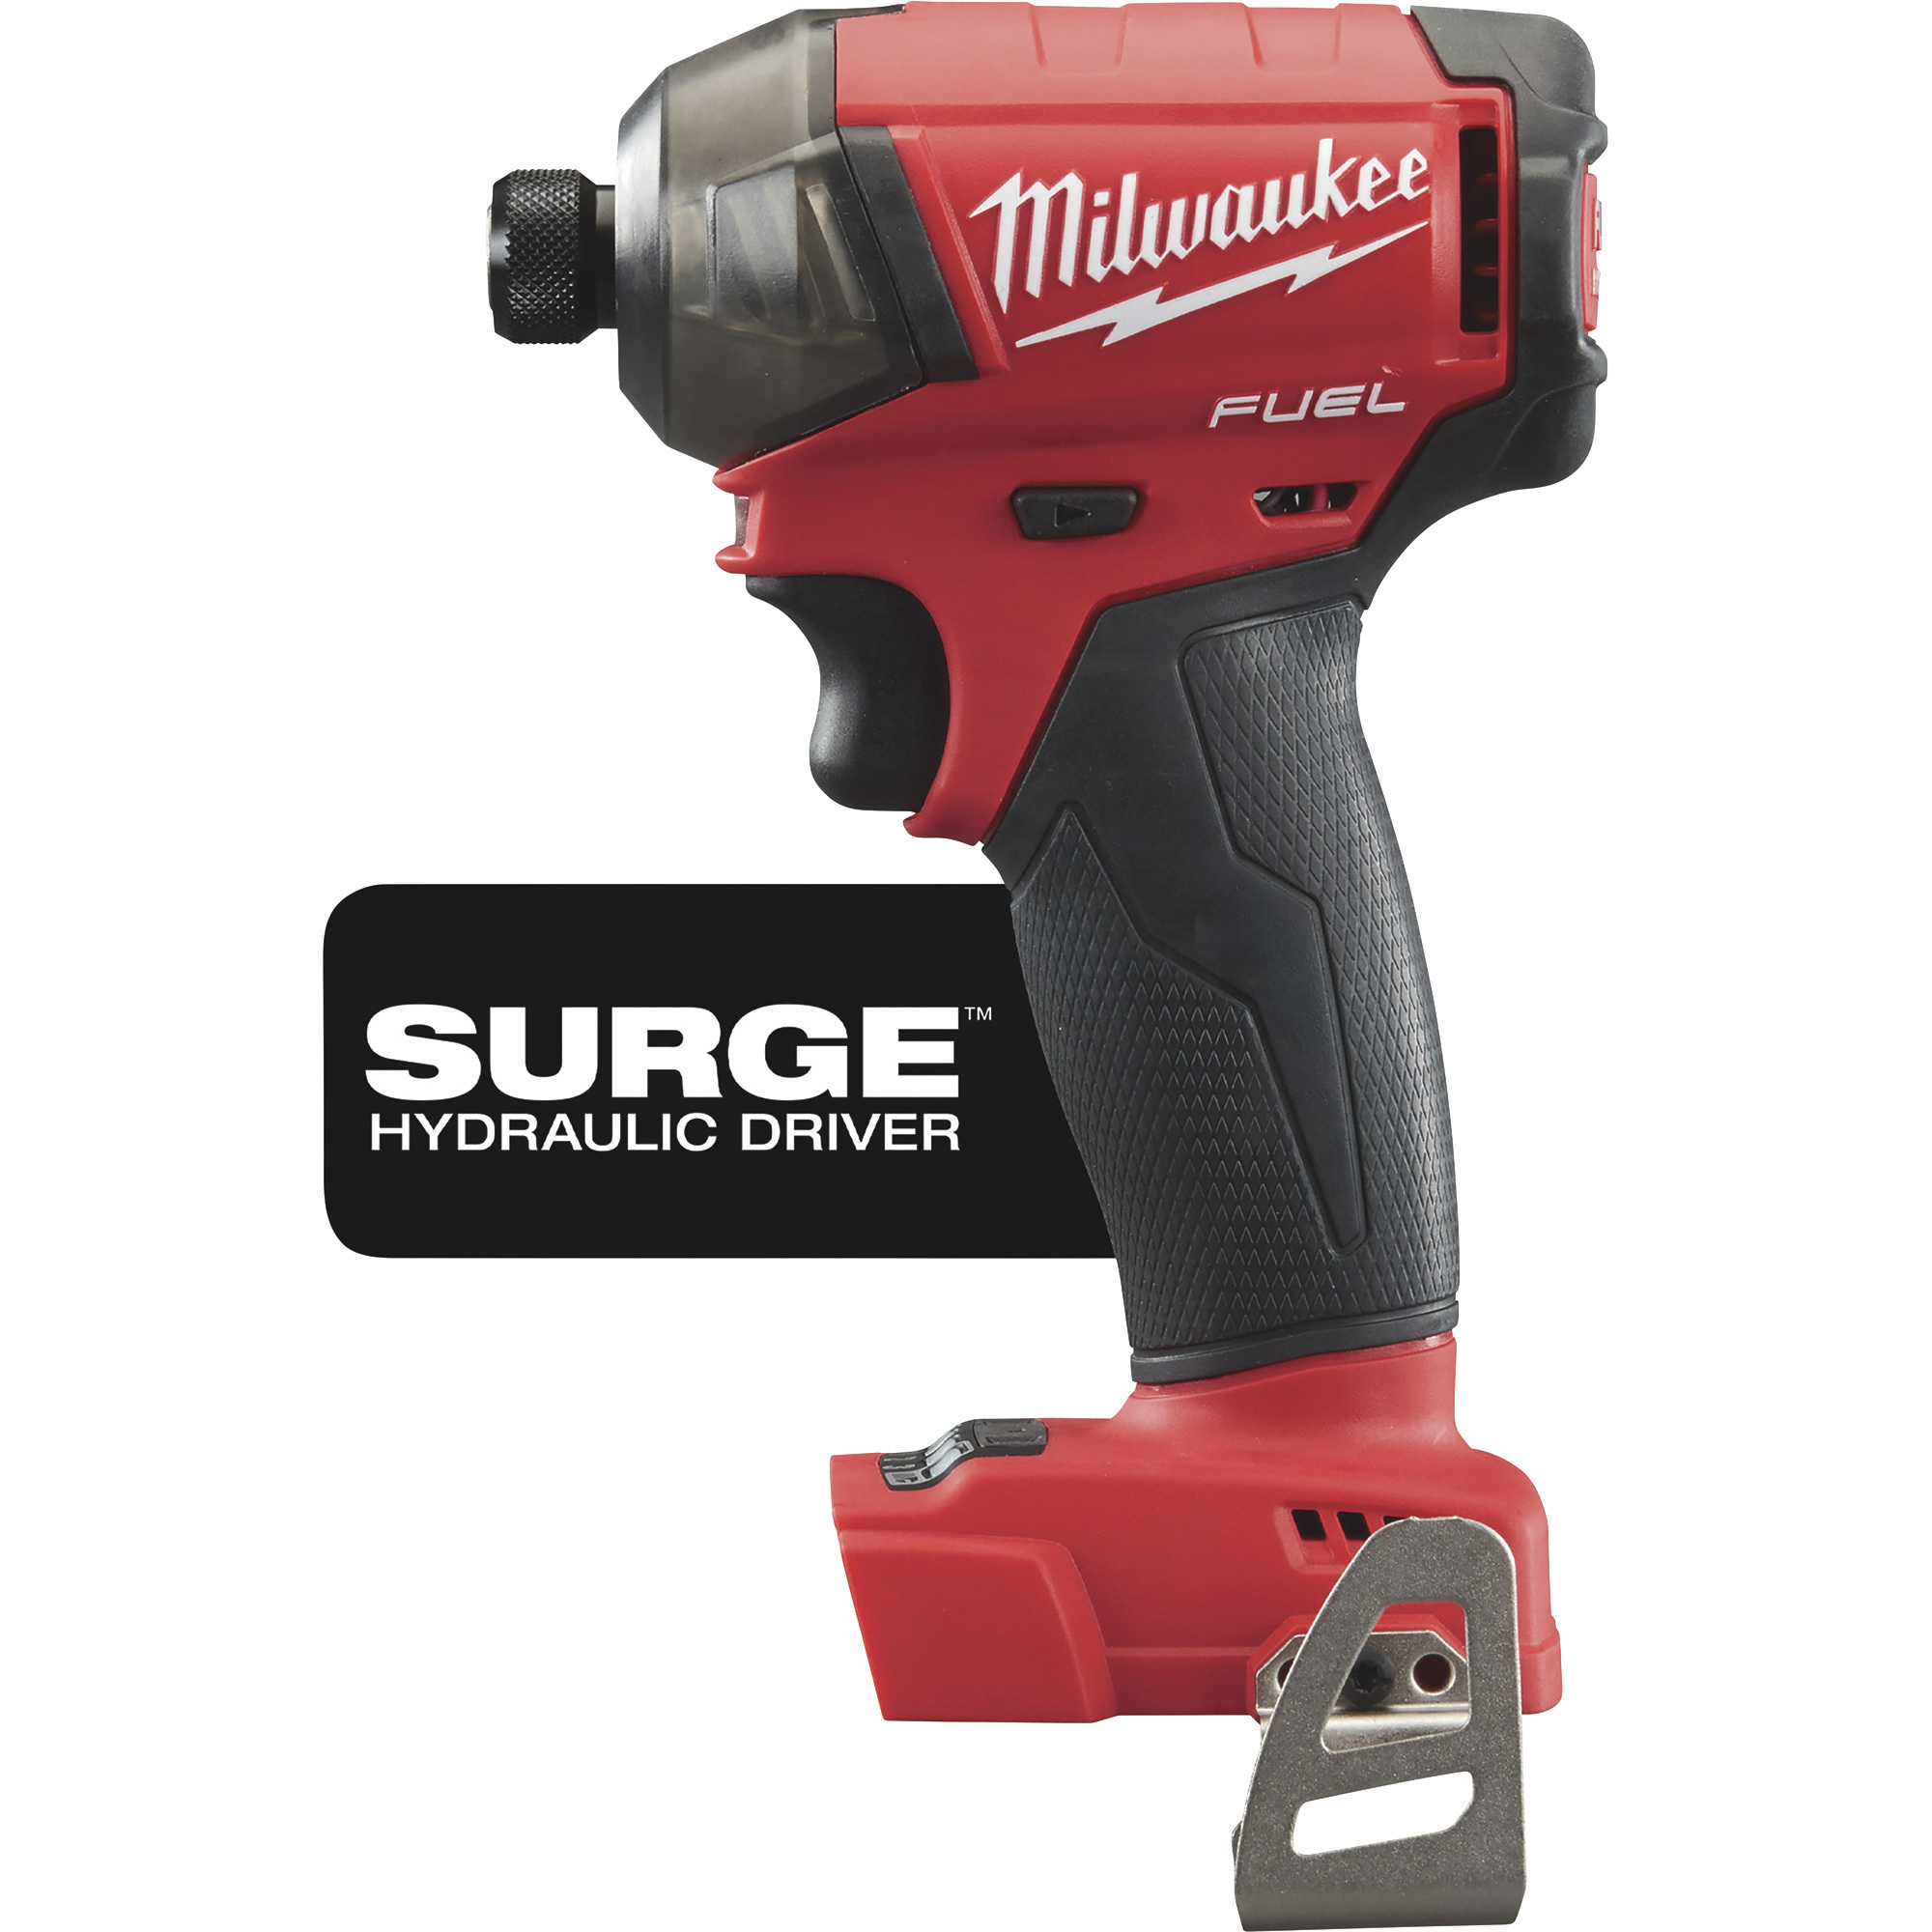 Milwaukee M18 Fuel Surge 1/4in. Hex Hydraulic Impact Driver — 18V, 450  In.-Lbs. Max. Torque, Tool Only, Model# 2760-20 Northern Tool